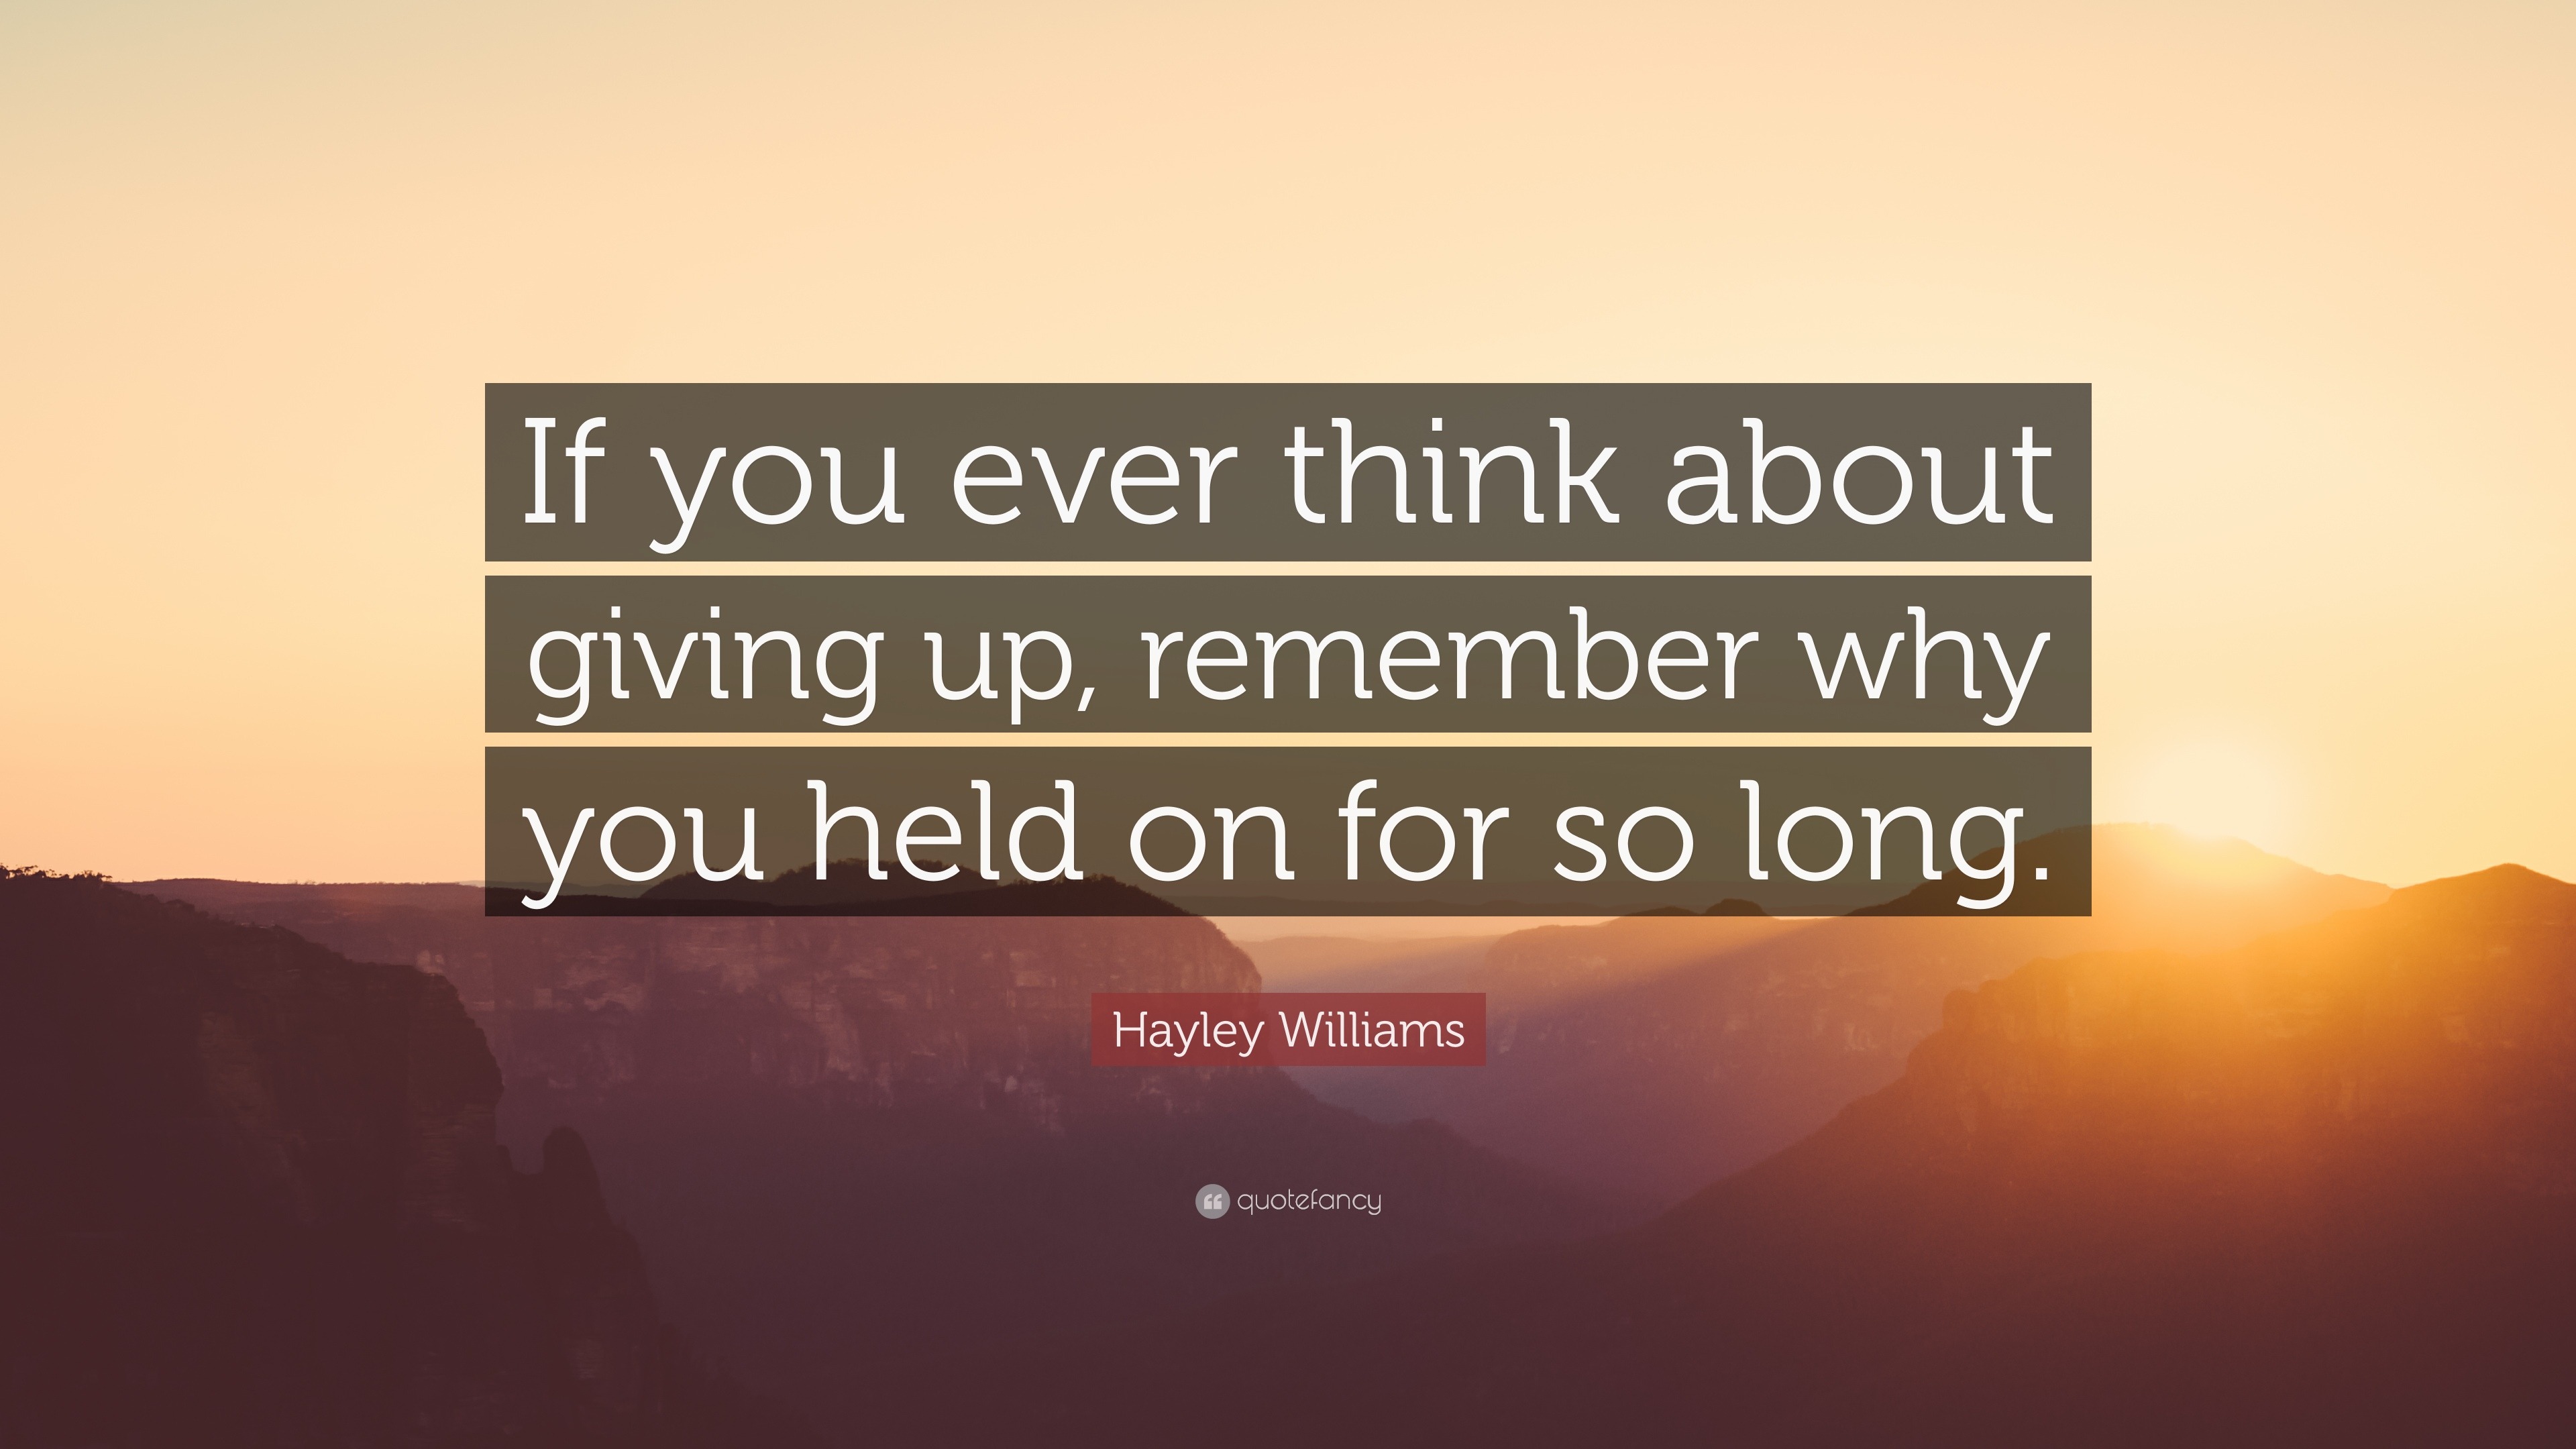 Hayley Williams Quote “if You Ever Think About Giving Up Remember Why